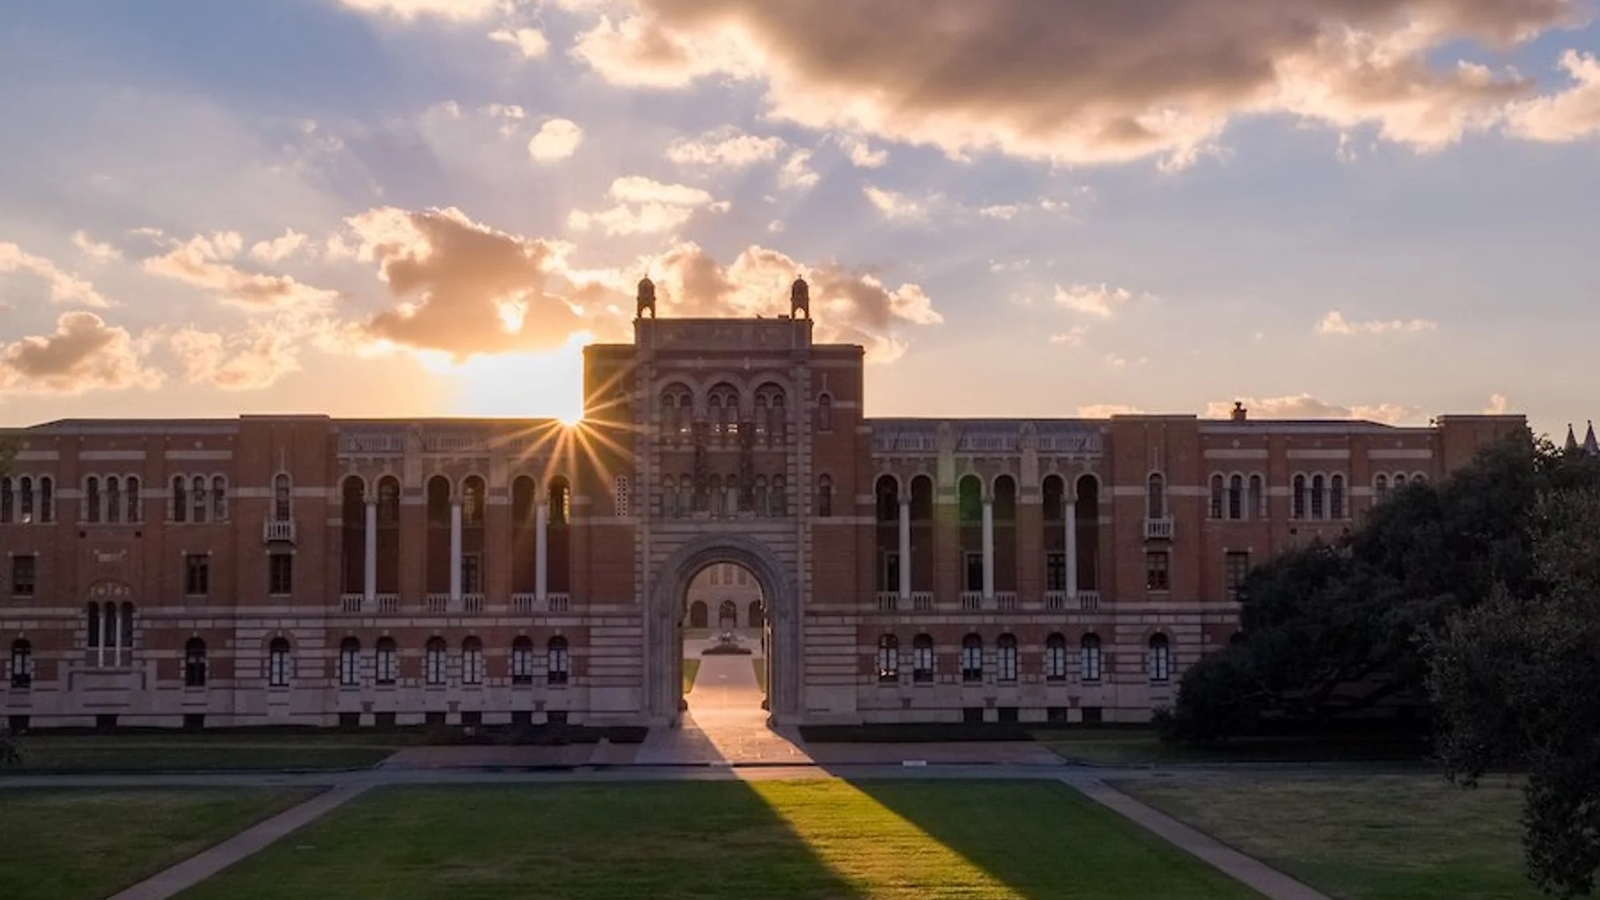 Houston’s Rice University rises to Ivy League status on Forbes’ New Ivies list [Video]